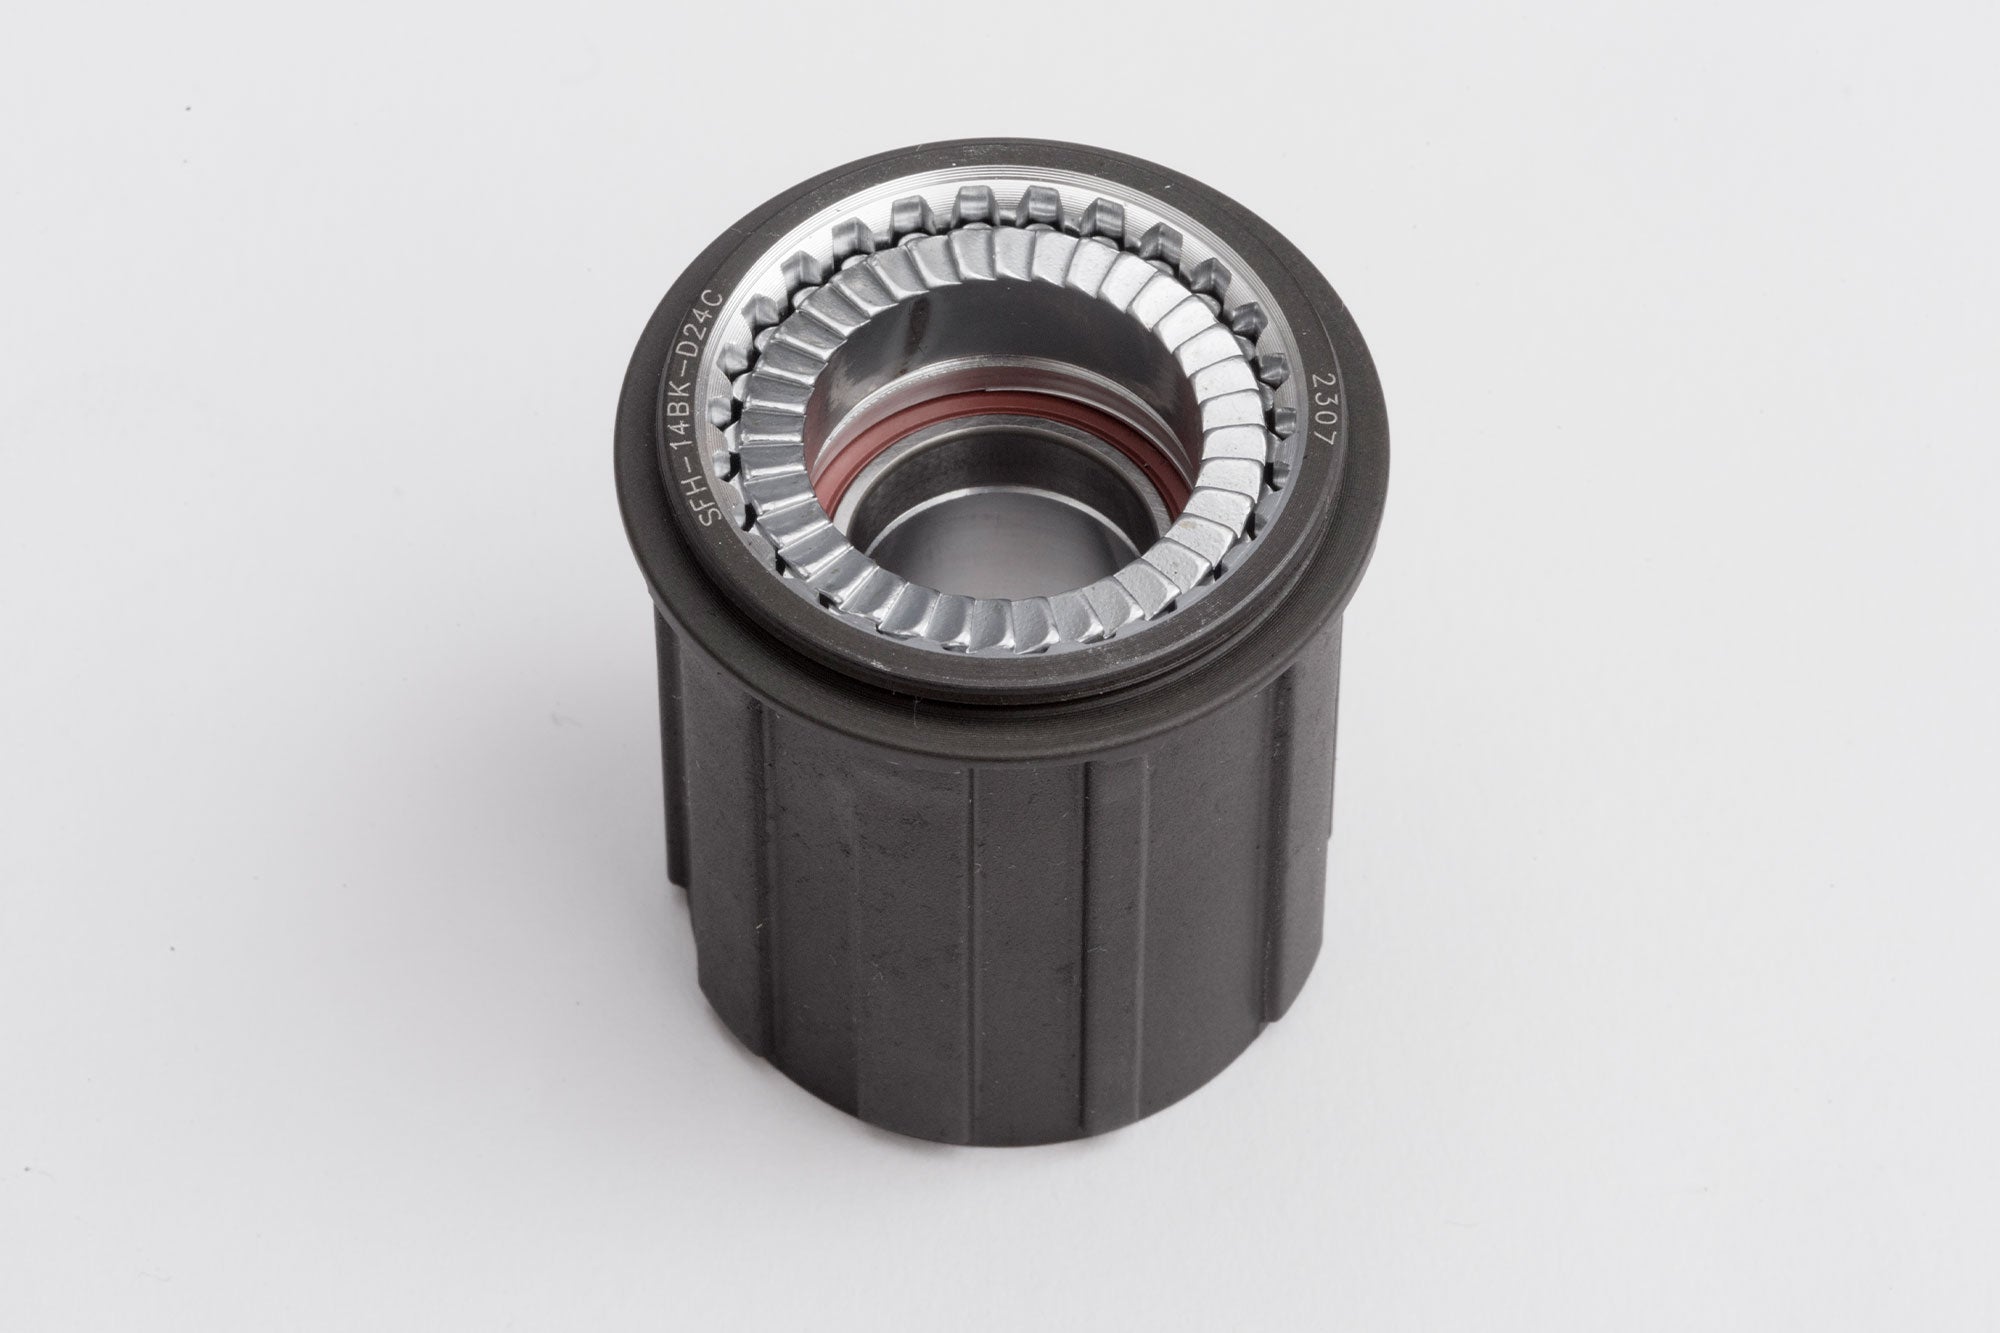 <h1>BEARINGS</h1><i>The heart of any wheel. Investing in them makes huge sense. We use high-grade precision smooth-rolling sealed cartridge bearings.</i>